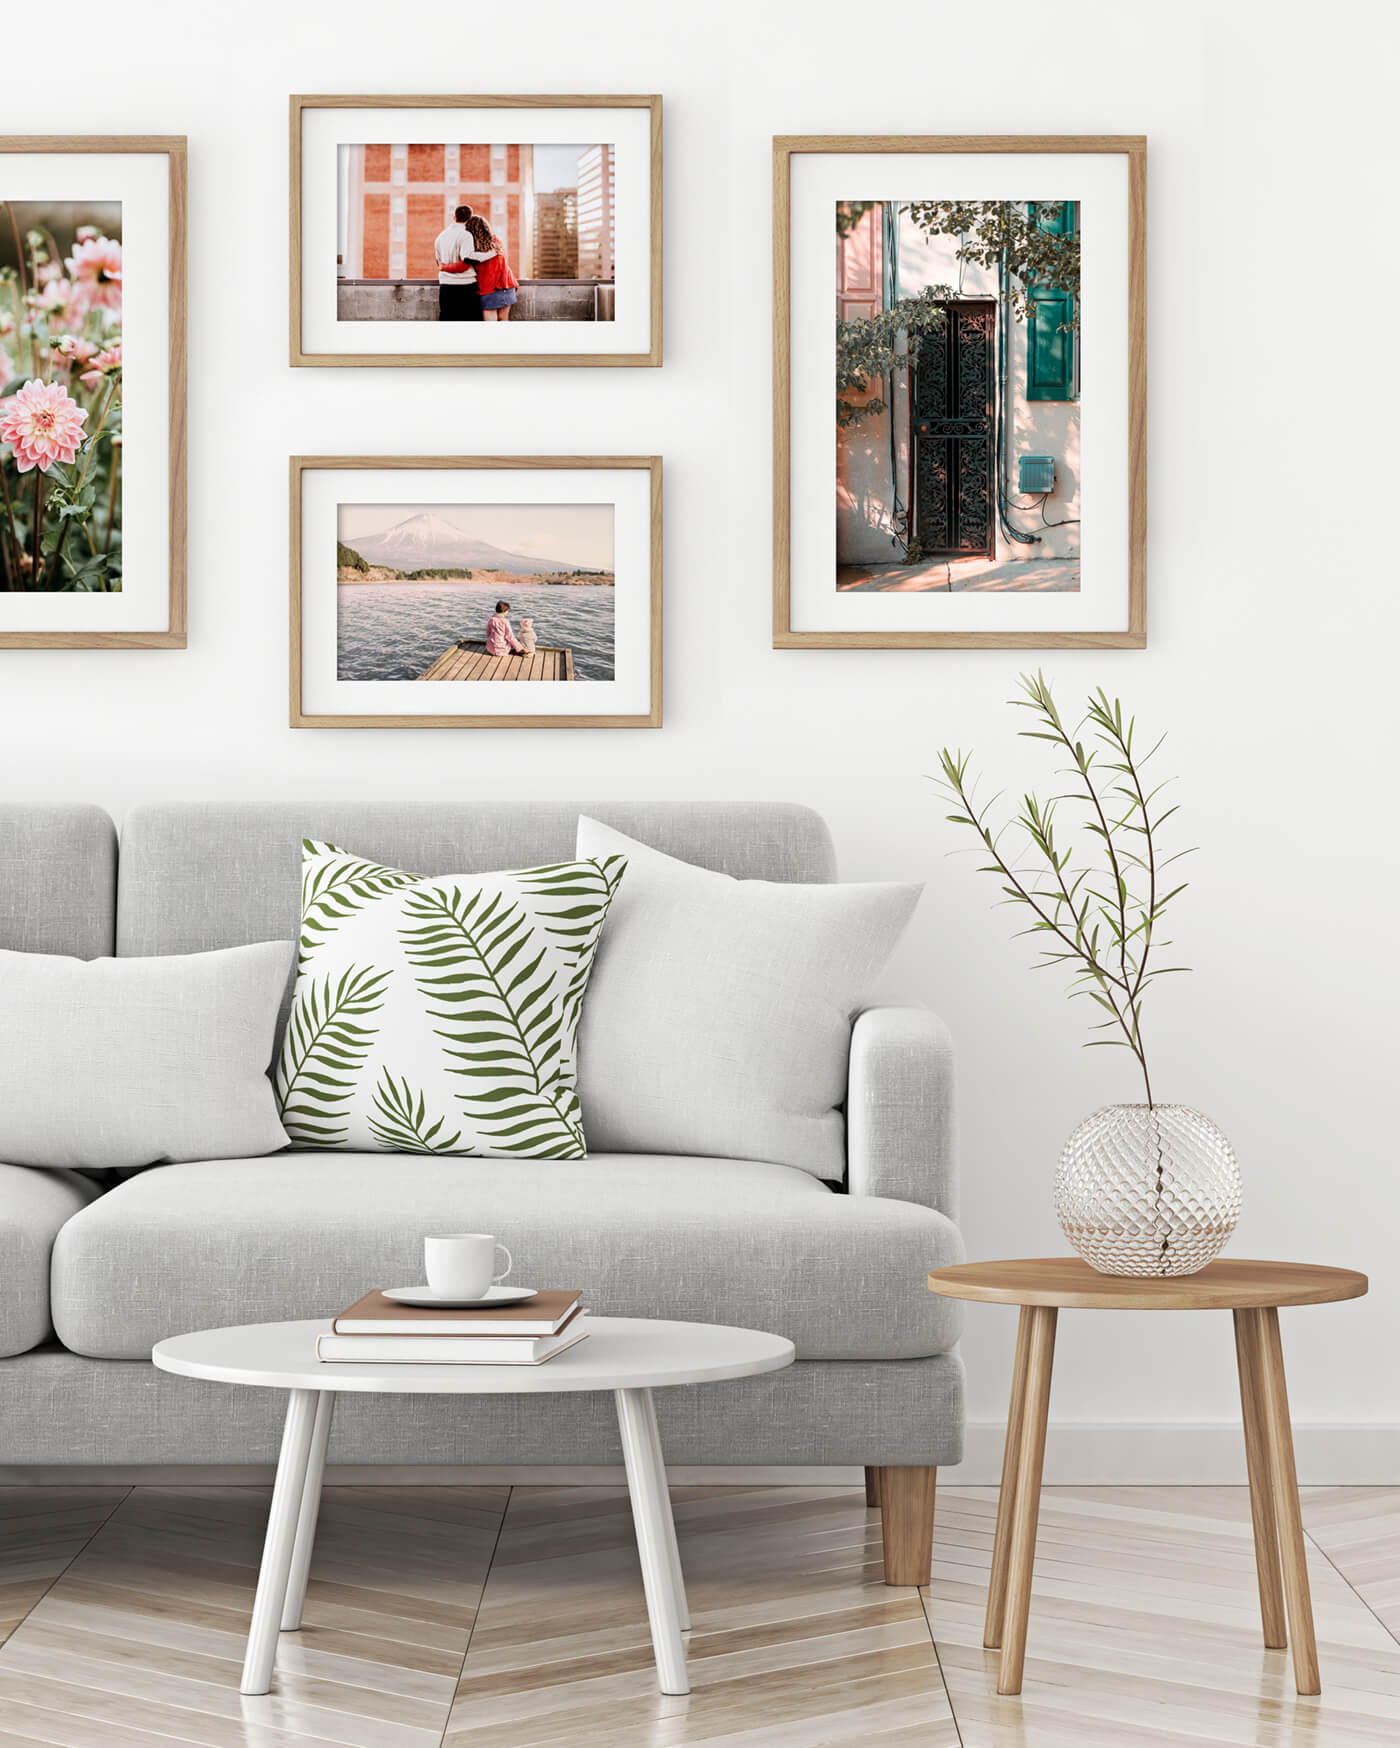 The Home Aesthetic of Your Dreams: A Guide - Printique, An Adorama Company